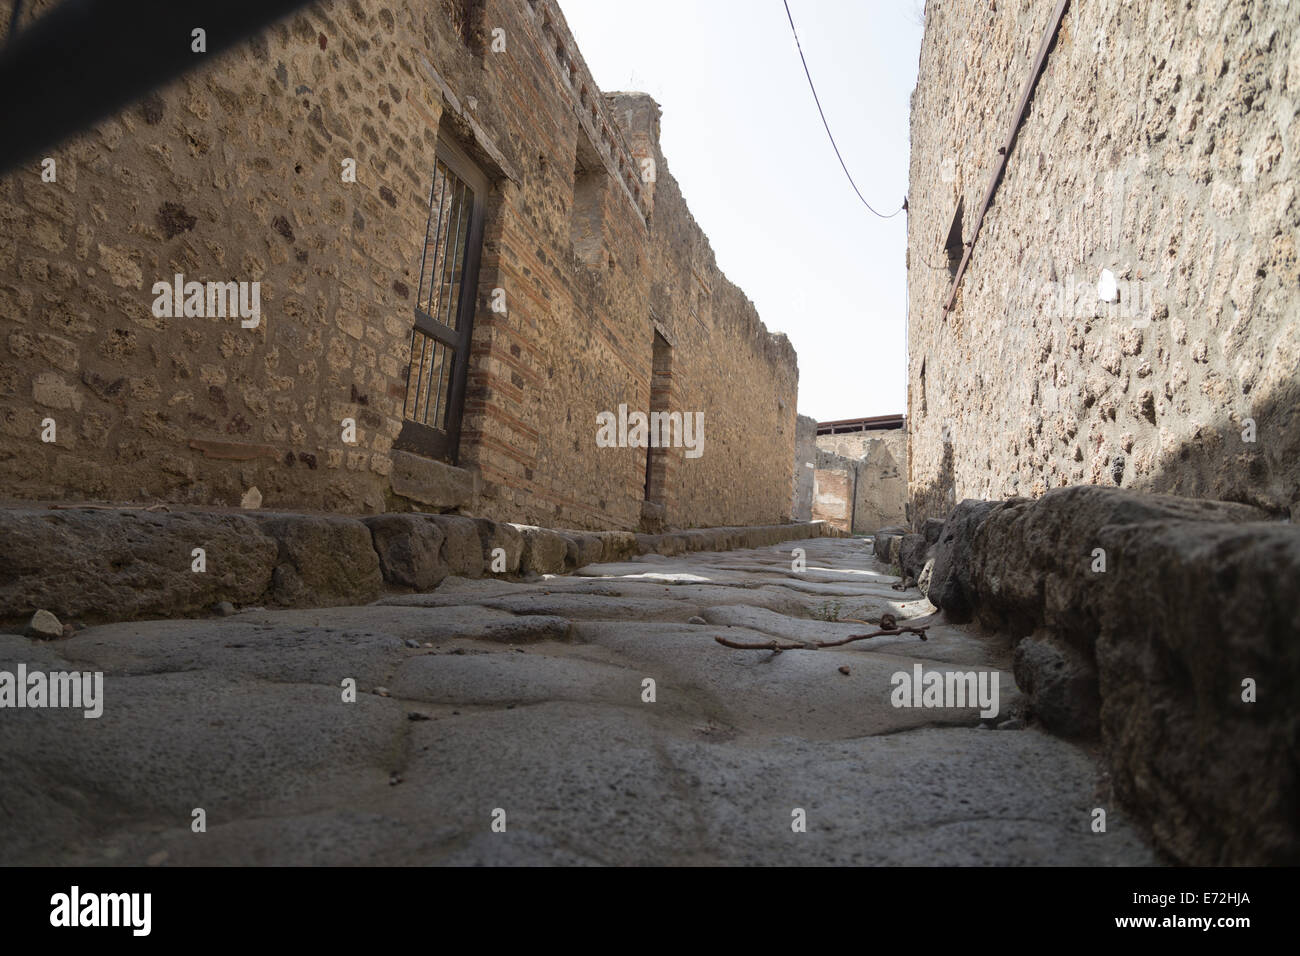 Looking down a deserted street in Pompeii, Italy Stock Photo